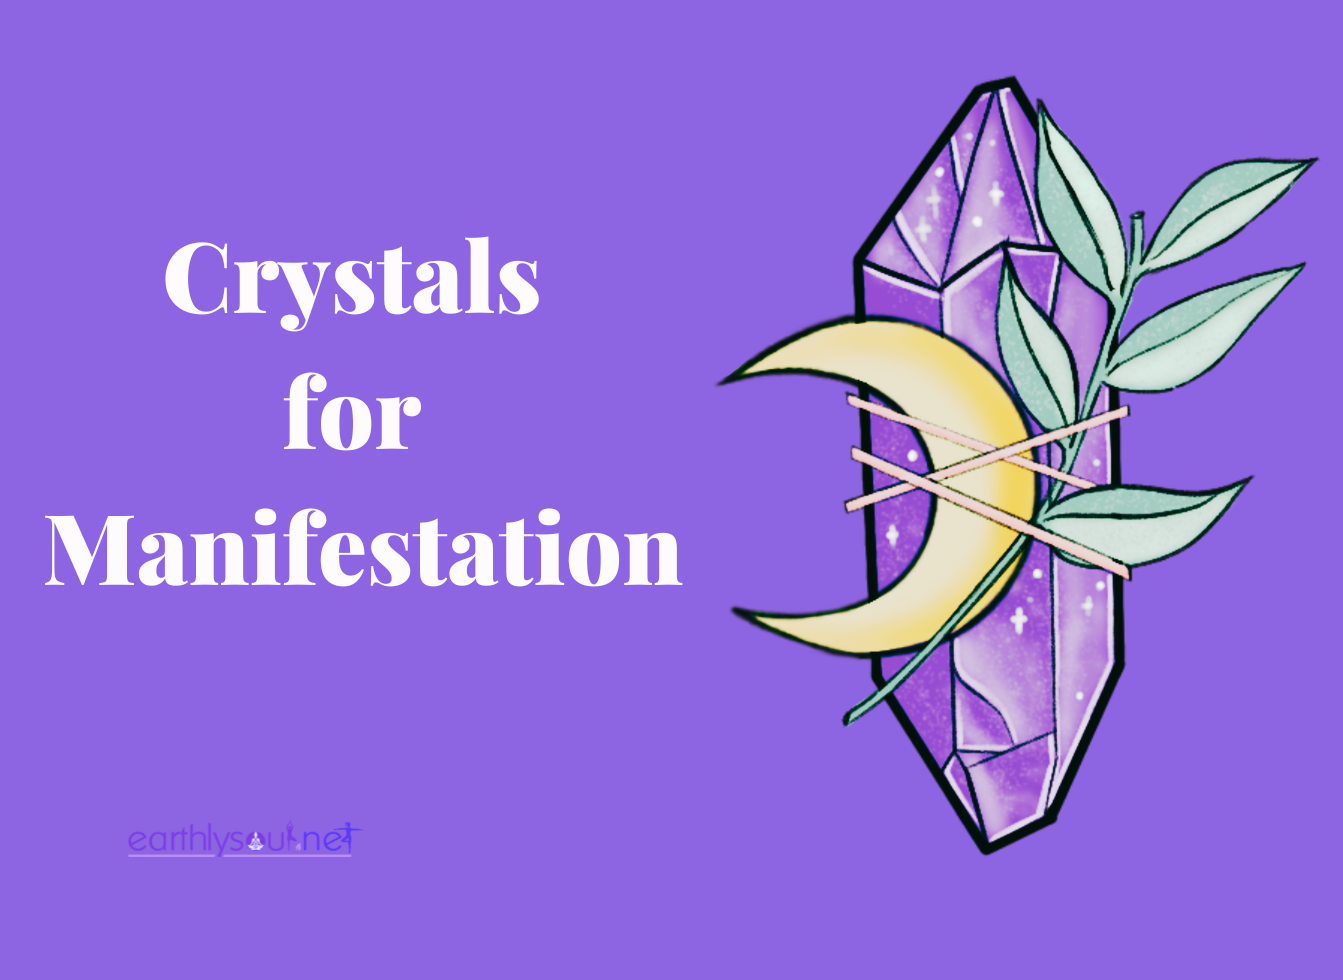 Crystals for manifestation featured image